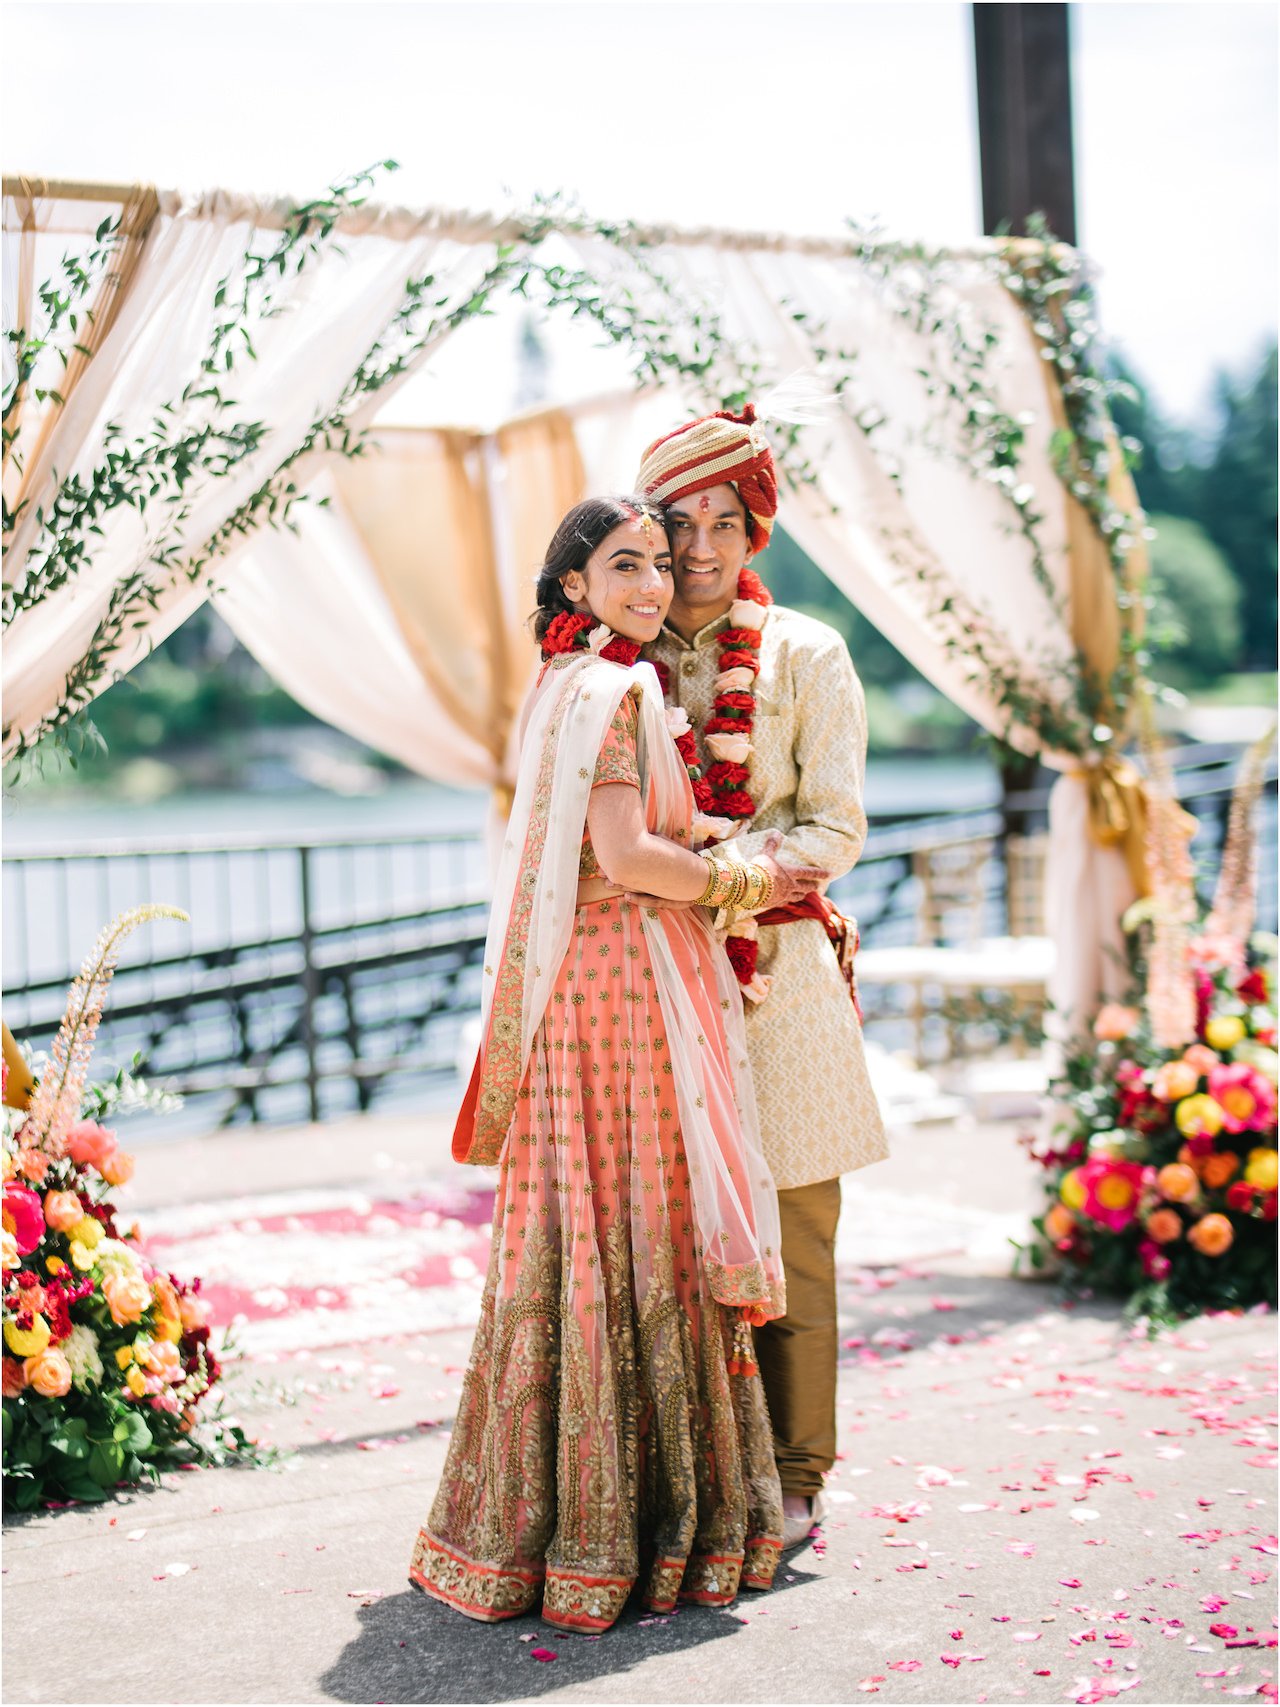  Bride and groom pose under floral mandap with red and white garland necklaces 